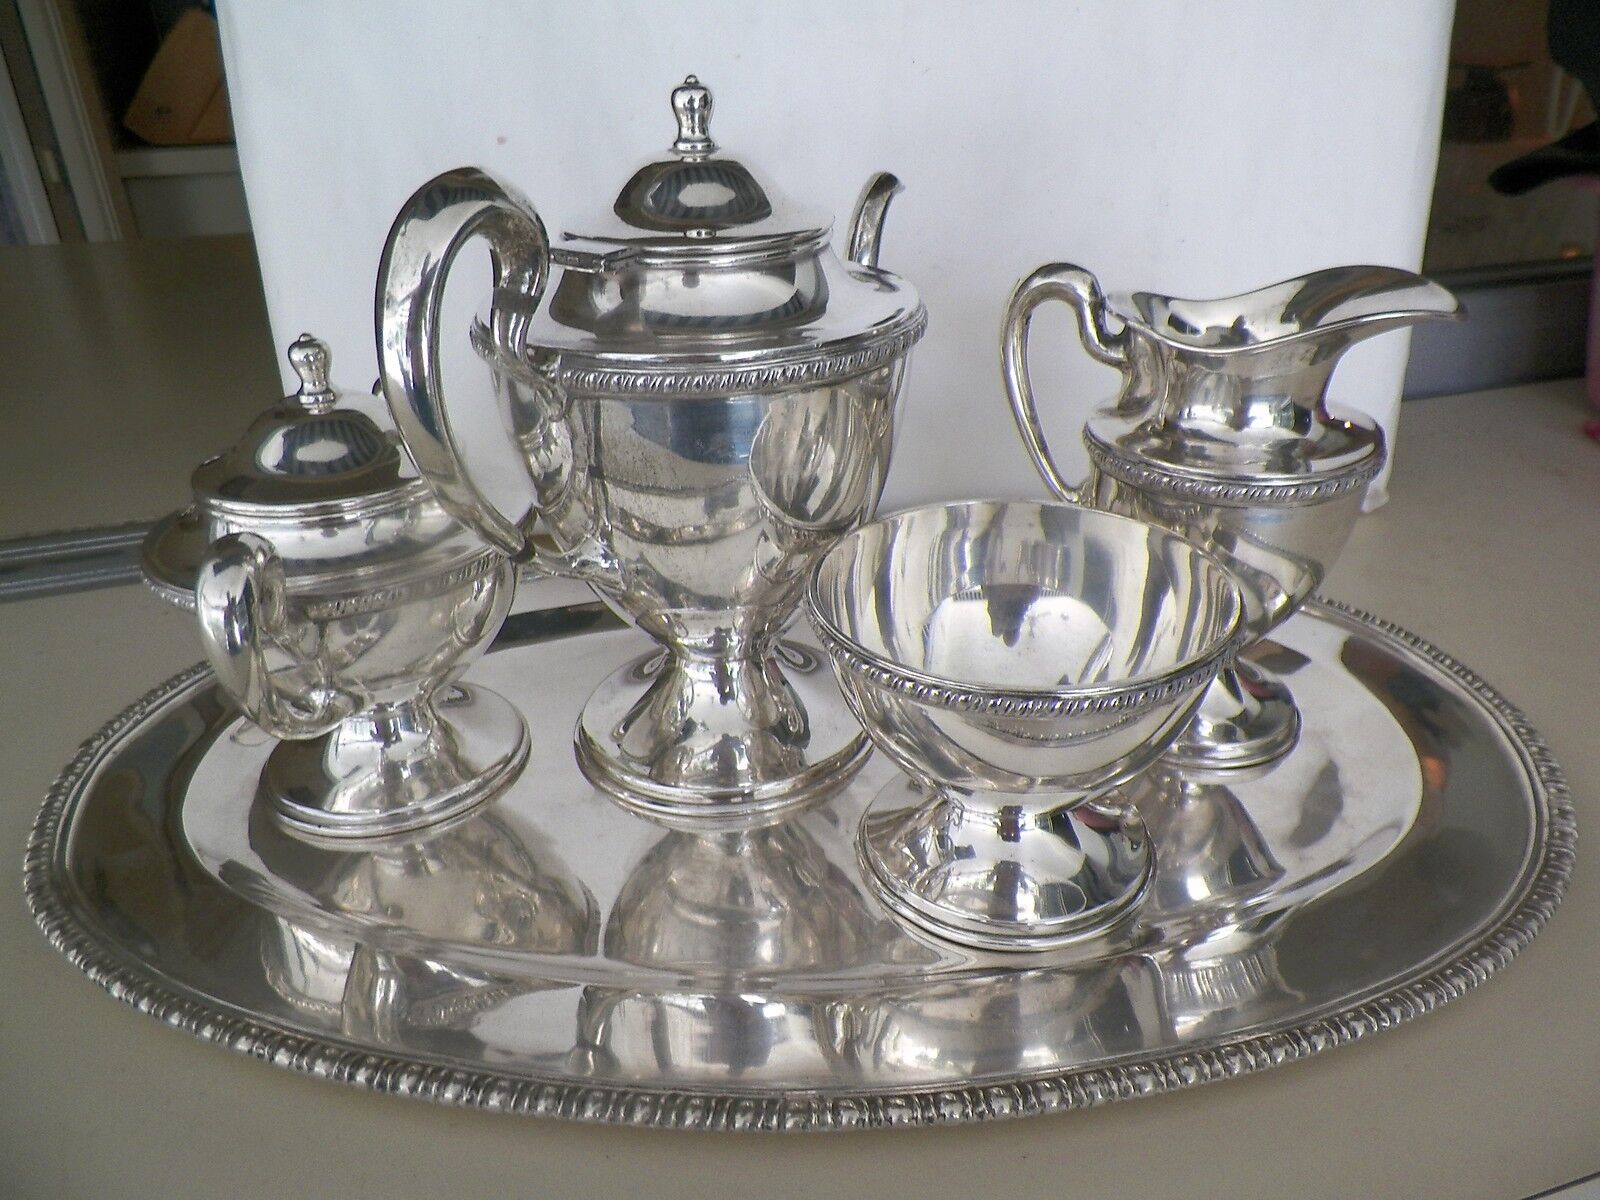 VNTG MEXICAN STERLING SILVER 5PC TEA/COFFEE SERVICE VG